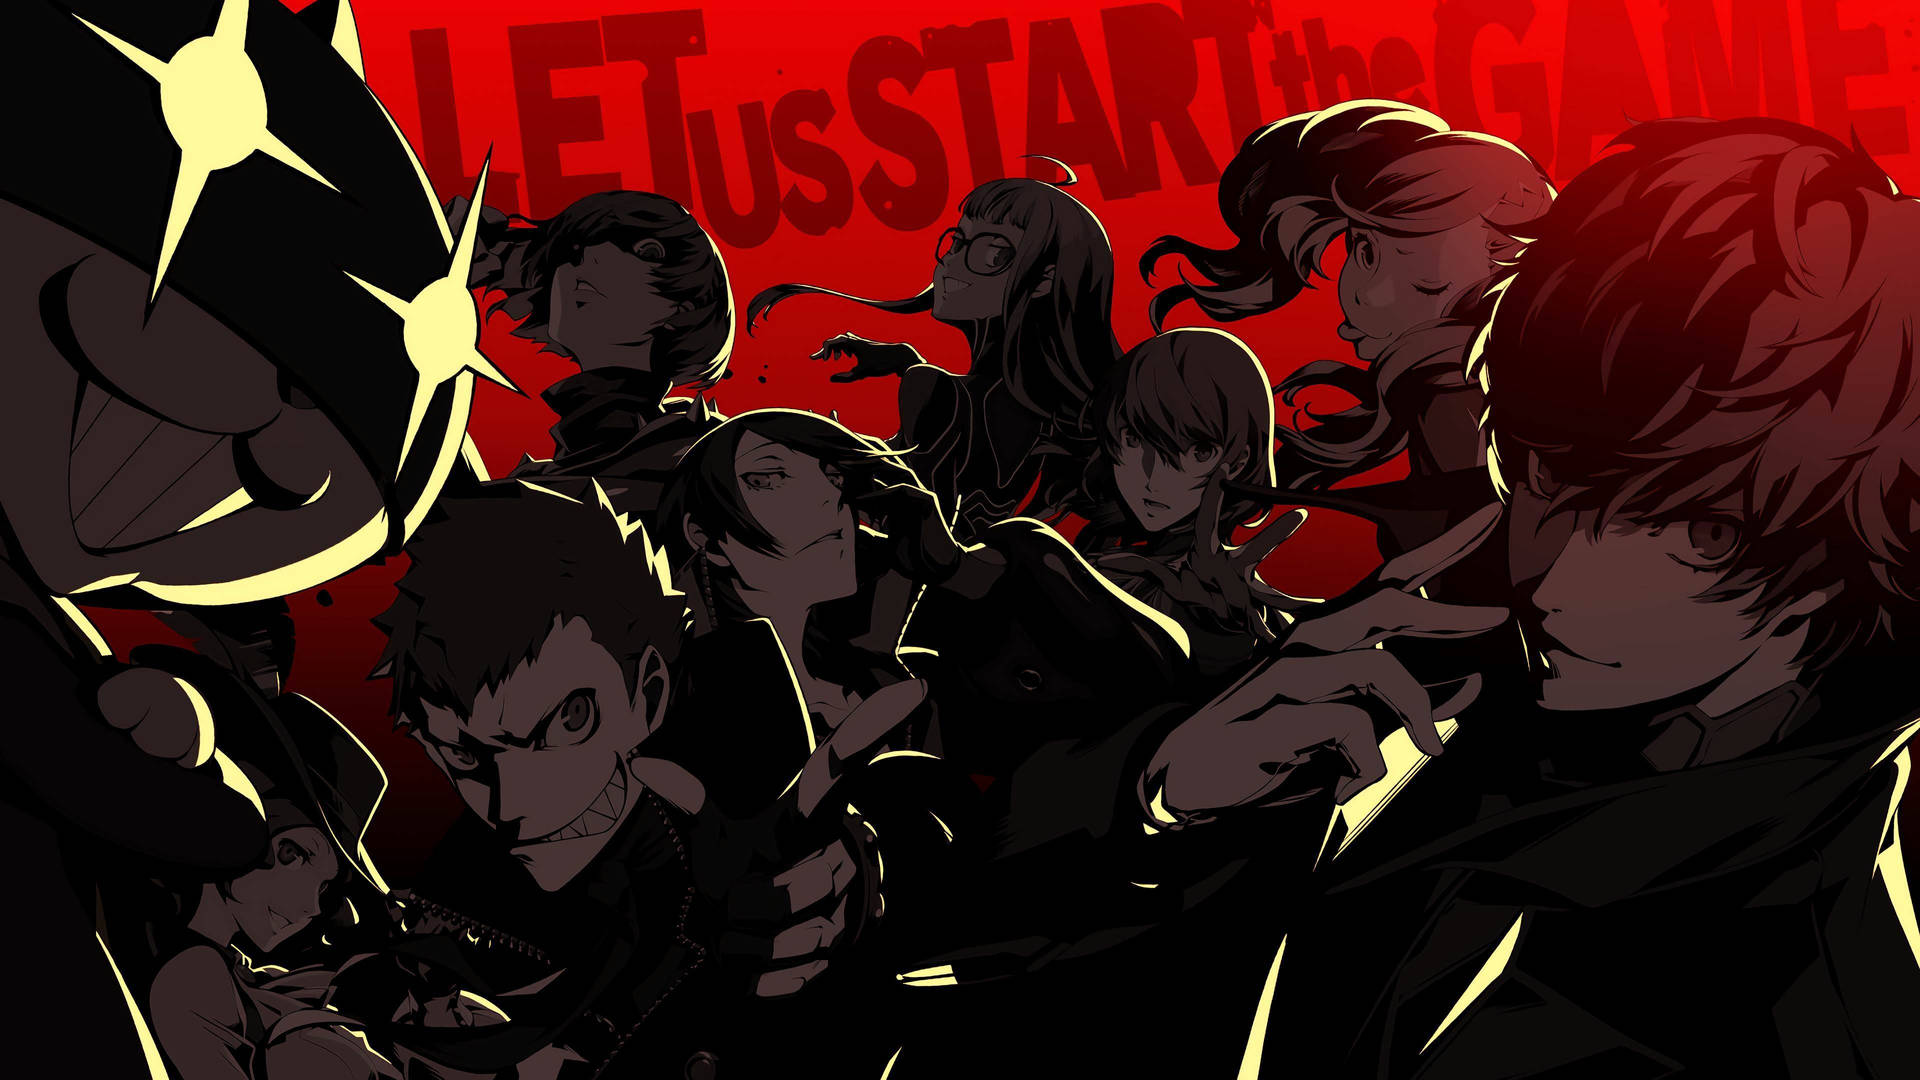 Enter the world of Persona 5 and join the Phantom Thieves Wallpaper